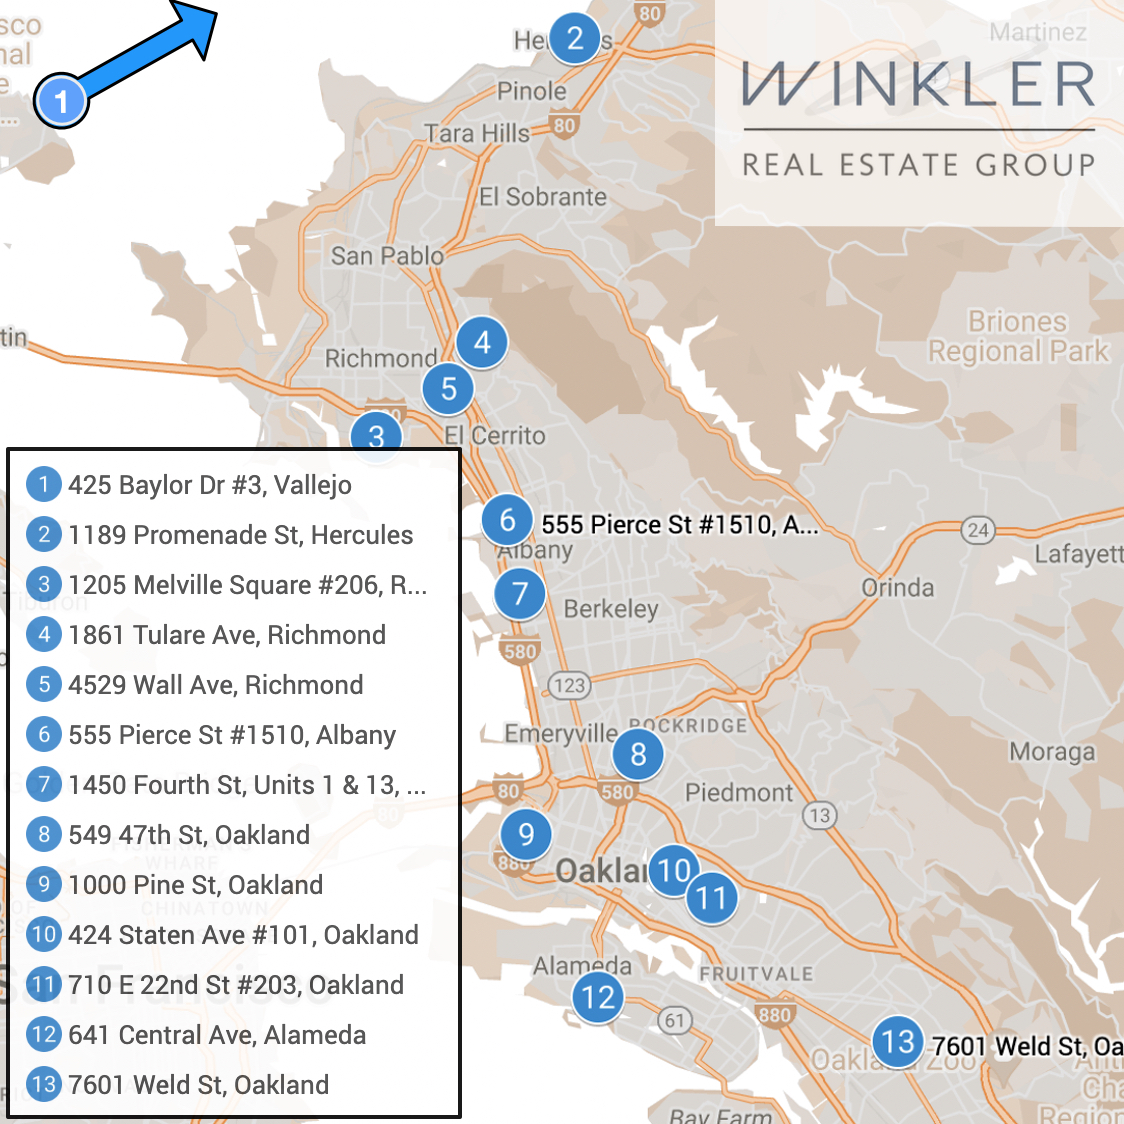 🏘️ BIG Open House Weekend w/ Winkler REG!

🗺️ Visit our map for details: ow.ly/SeQ850Rq176

#California #RealEstate #OpenHouse #RealEstateForSale #SFBayArea #BayAreaRealEstate #RealEstateInvestments #RealEstateListing #ResidentialRealEstate #RealEstateServices #BayAreaHomes